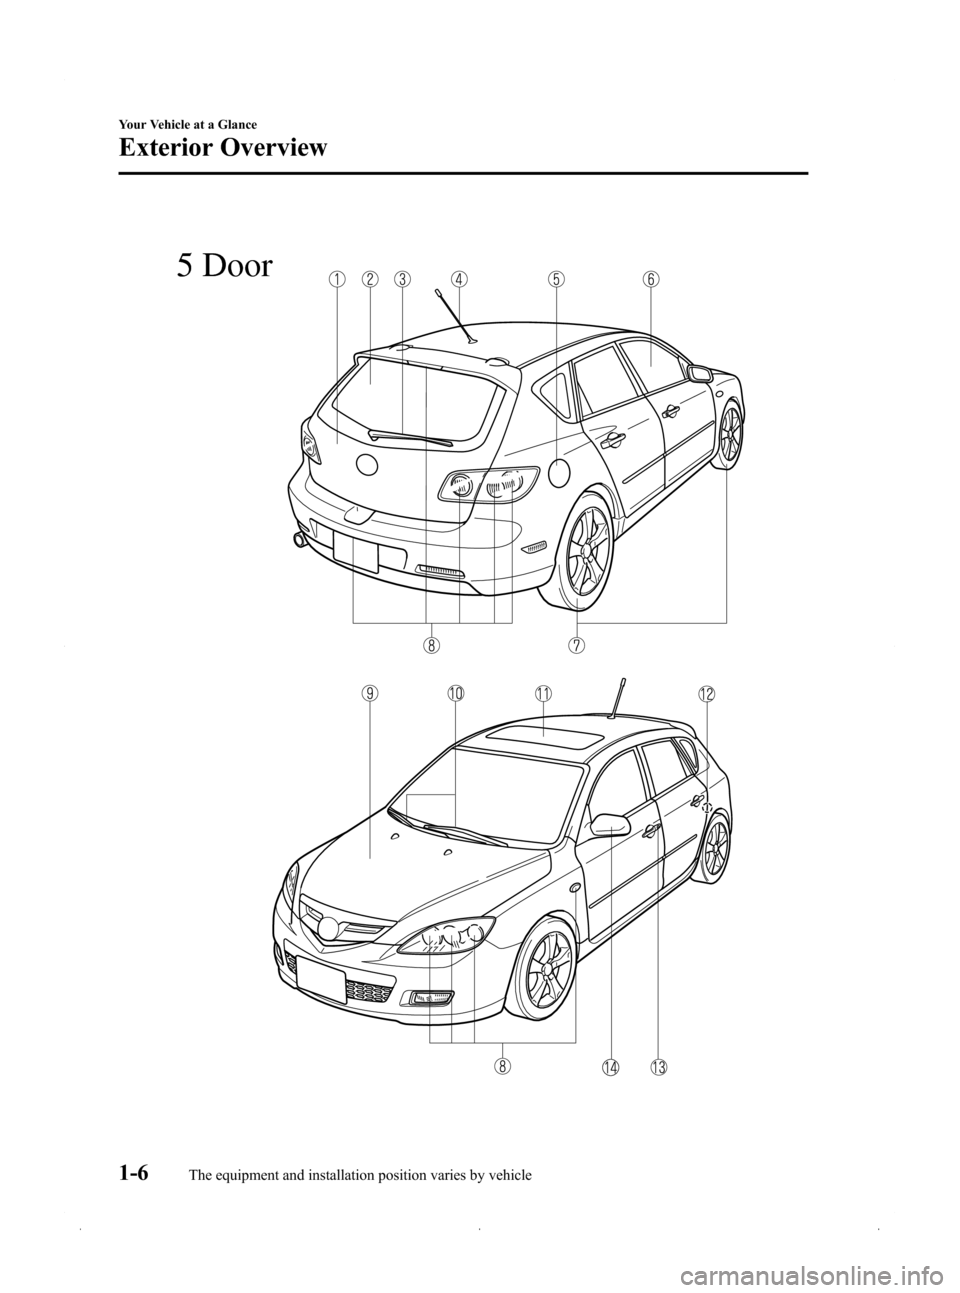 MAZDA MODEL 3 HATCHBACK 2009   (in English) User Guide Black plate (12,1)
5 Door
1-6
Your Vehicle at a Glance
The equipment and installation position varies by vehicle
Exterior Overview
Mazda3_8Z87-EA-08F_Edition1 Page12
Monday, May 19 2008 9:55 AM
Form N